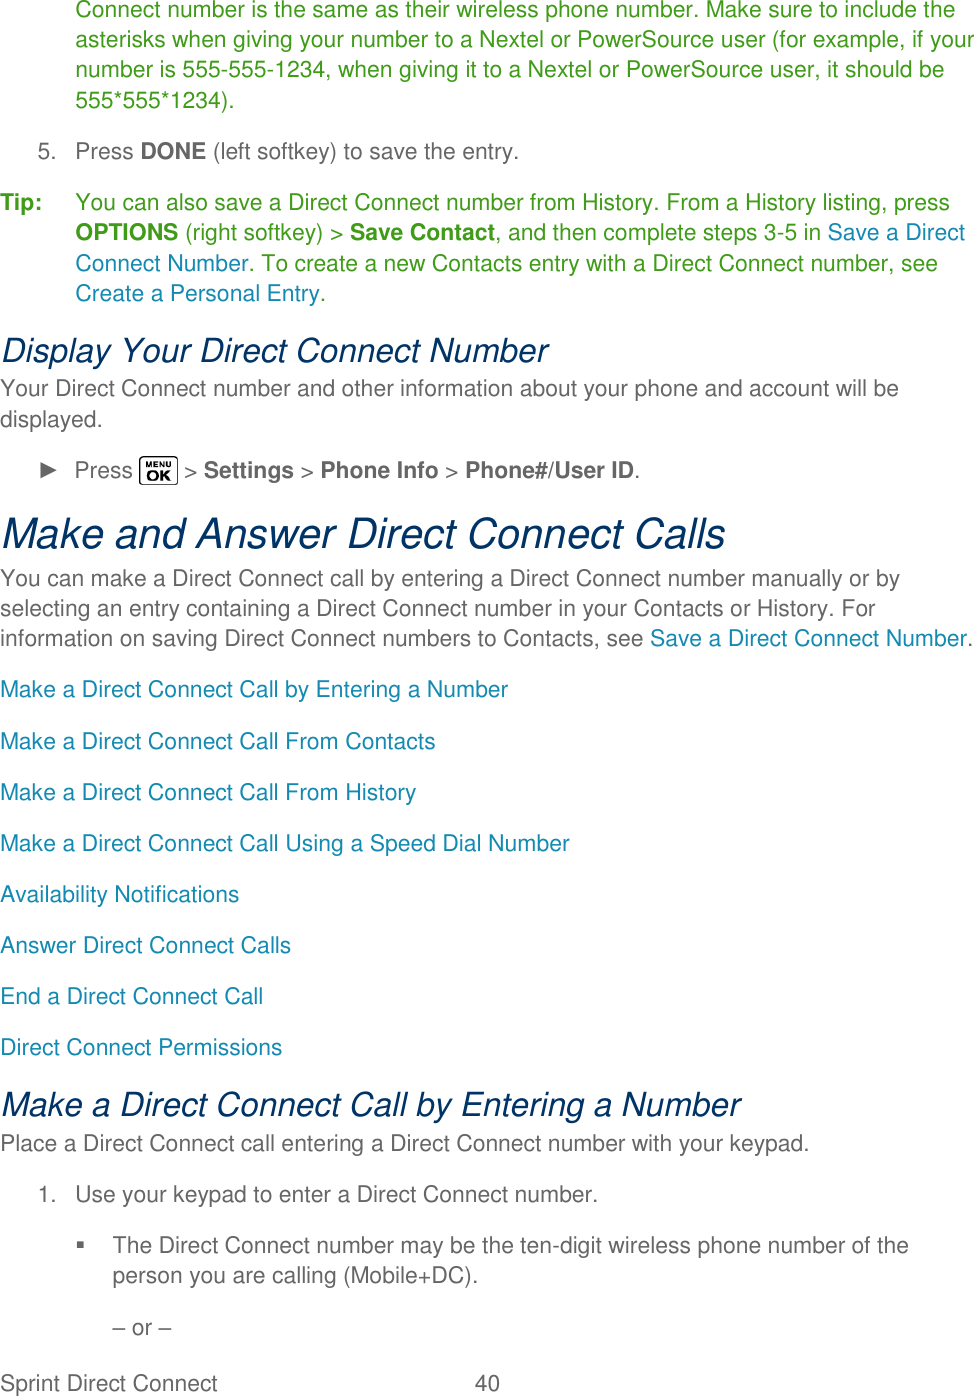  Sprint Direct Connect  40   Connect number is the same as their wireless phone number. Make sure to include the asterisks when giving your number to a Nextel or PowerSource user (for example, if your number is 555-555-1234, when giving it to a Nextel or PowerSource user, it should be 555*555*1234). 5.  Press DONE (left softkey) to save the entry. Tip:  You can also save a Direct Connect number from History. From a History listing, press OPTIONS (right softkey) &gt; Save Contact, and then complete steps 3-5 in Save a Direct Connect Number. To create a new Contacts entry with a Direct Connect number, see Create a Personal Entry. Display Your Direct Connect Number Your Direct Connect number and other information about your phone and account will be displayed. ►  Press   &gt; Settings &gt; Phone Info &gt; Phone#/User ID. Make and Answer Direct Connect Calls You can make a Direct Connect call by entering a Direct Connect number manually or by selecting an entry containing a Direct Connect number in your Contacts or History. For information on saving Direct Connect numbers to Contacts, see Save a Direct Connect Number. Make a Direct Connect Call by Entering a Number Make a Direct Connect Call From Contacts Make a Direct Connect Call From History Make a Direct Connect Call Using a Speed Dial Number Availability Notifications Answer Direct Connect Calls End a Direct Connect Call Direct Connect Permissions Make a Direct Connect Call by Entering a Number Place a Direct Connect call entering a Direct Connect number with your keypad. 1.  Use your keypad to enter a Direct Connect number.   The Direct Connect number may be the ten-digit wireless phone number of the person you are calling (Mobile+DC). – or – 